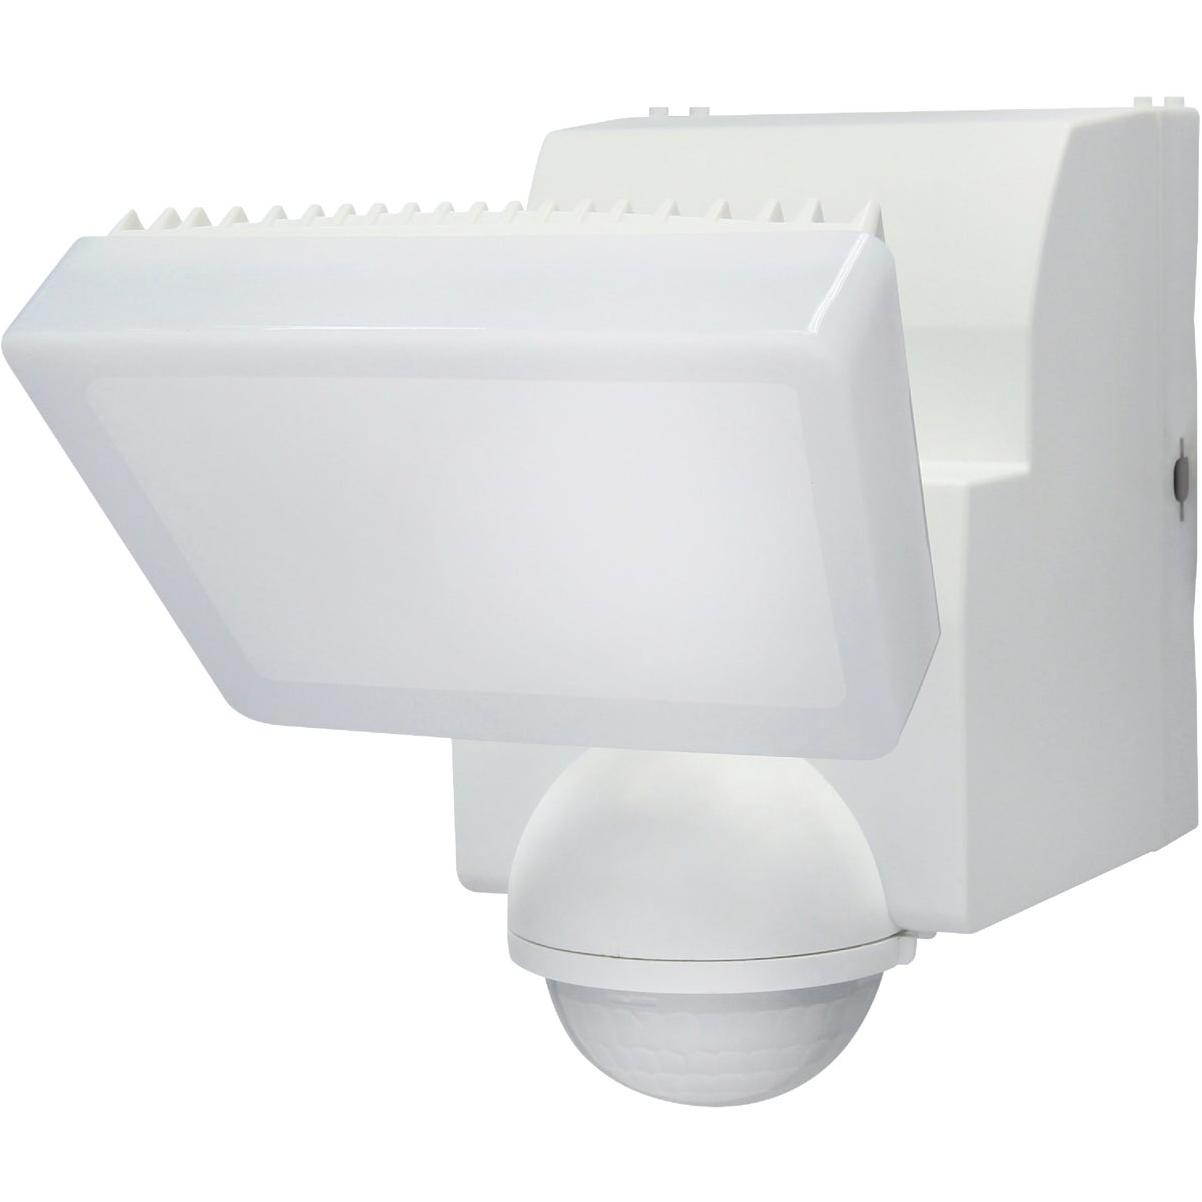 IQ America White 500 Lm. LED Motion Sensing Battery Operated 1-Head  Security Light Fixture | Hills Flat Lumber